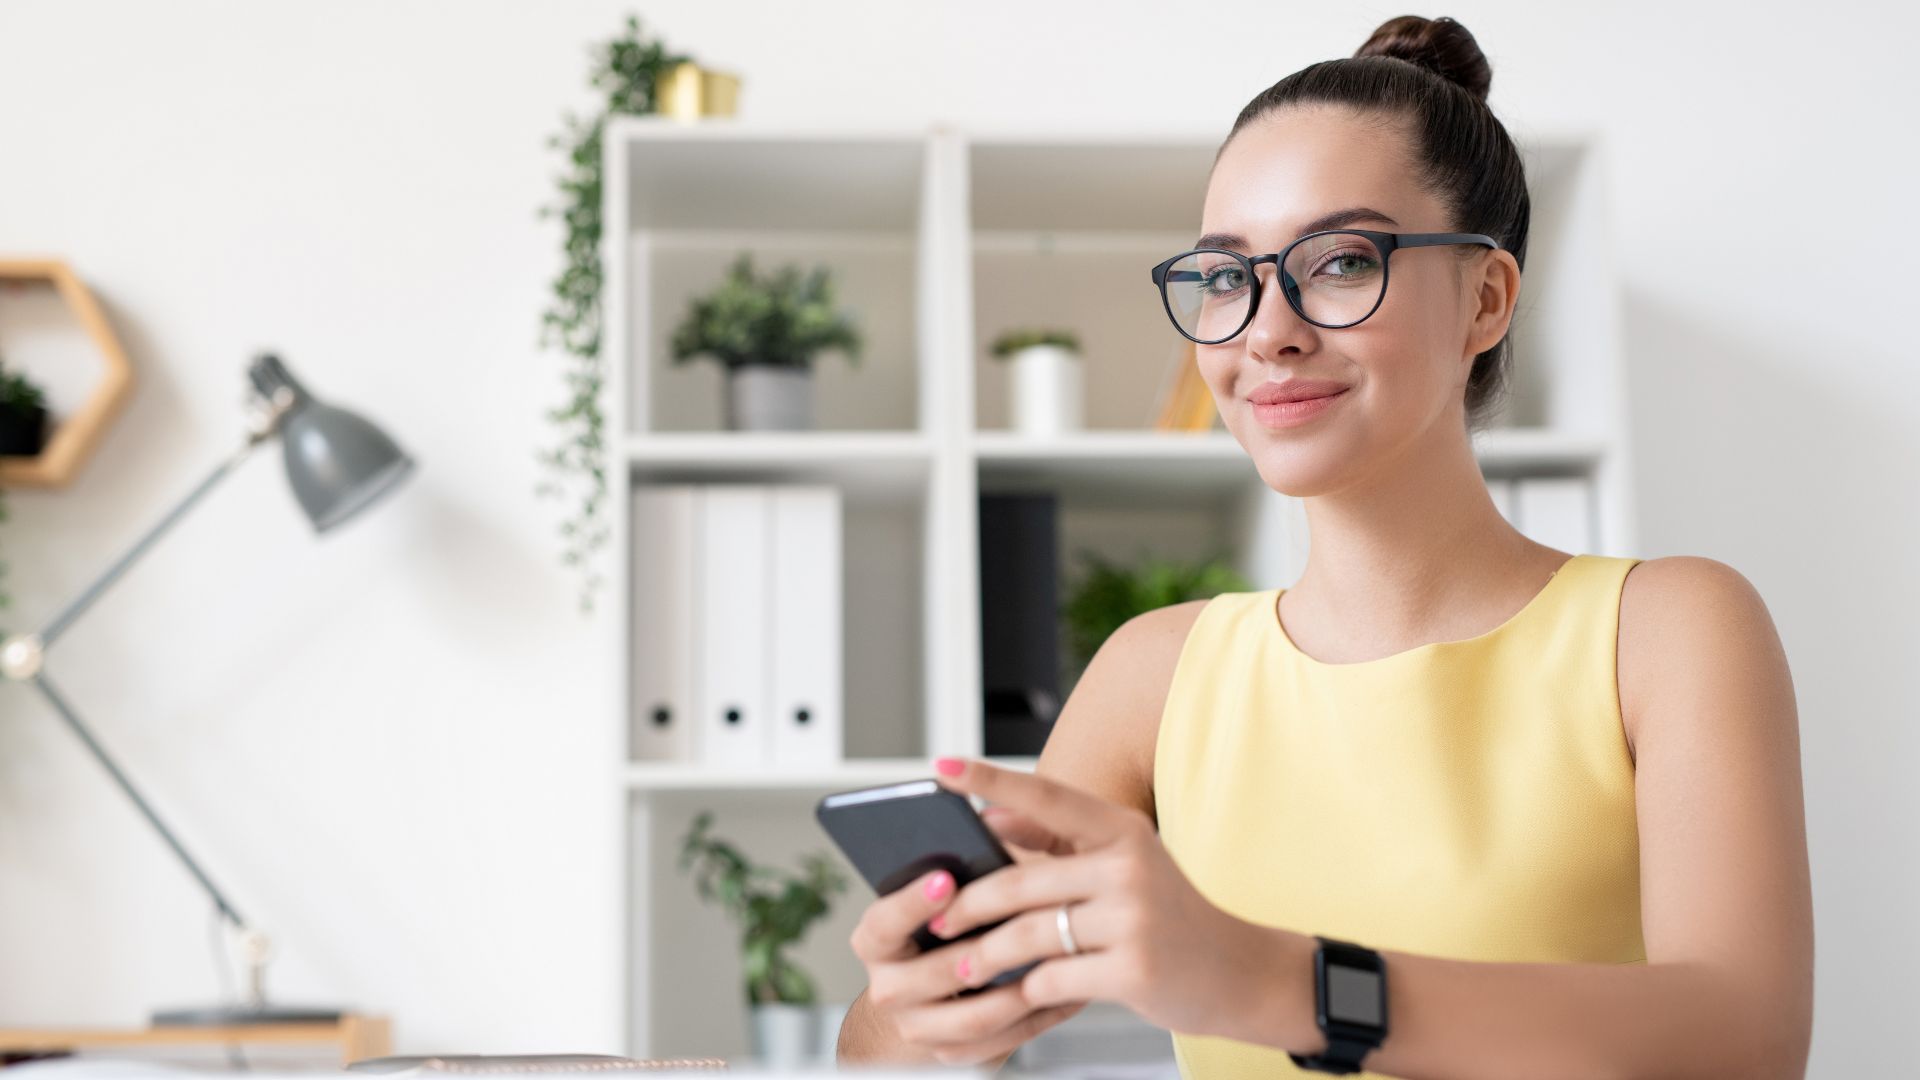 Local SEO, Professional Woman with Smartphone in Modern Office Setting - Local SEO and Web Design Specialist in Yellow Sleeveless Top, Glasses, and Home Decor Enhanced Ambiance Web Design, East Texas